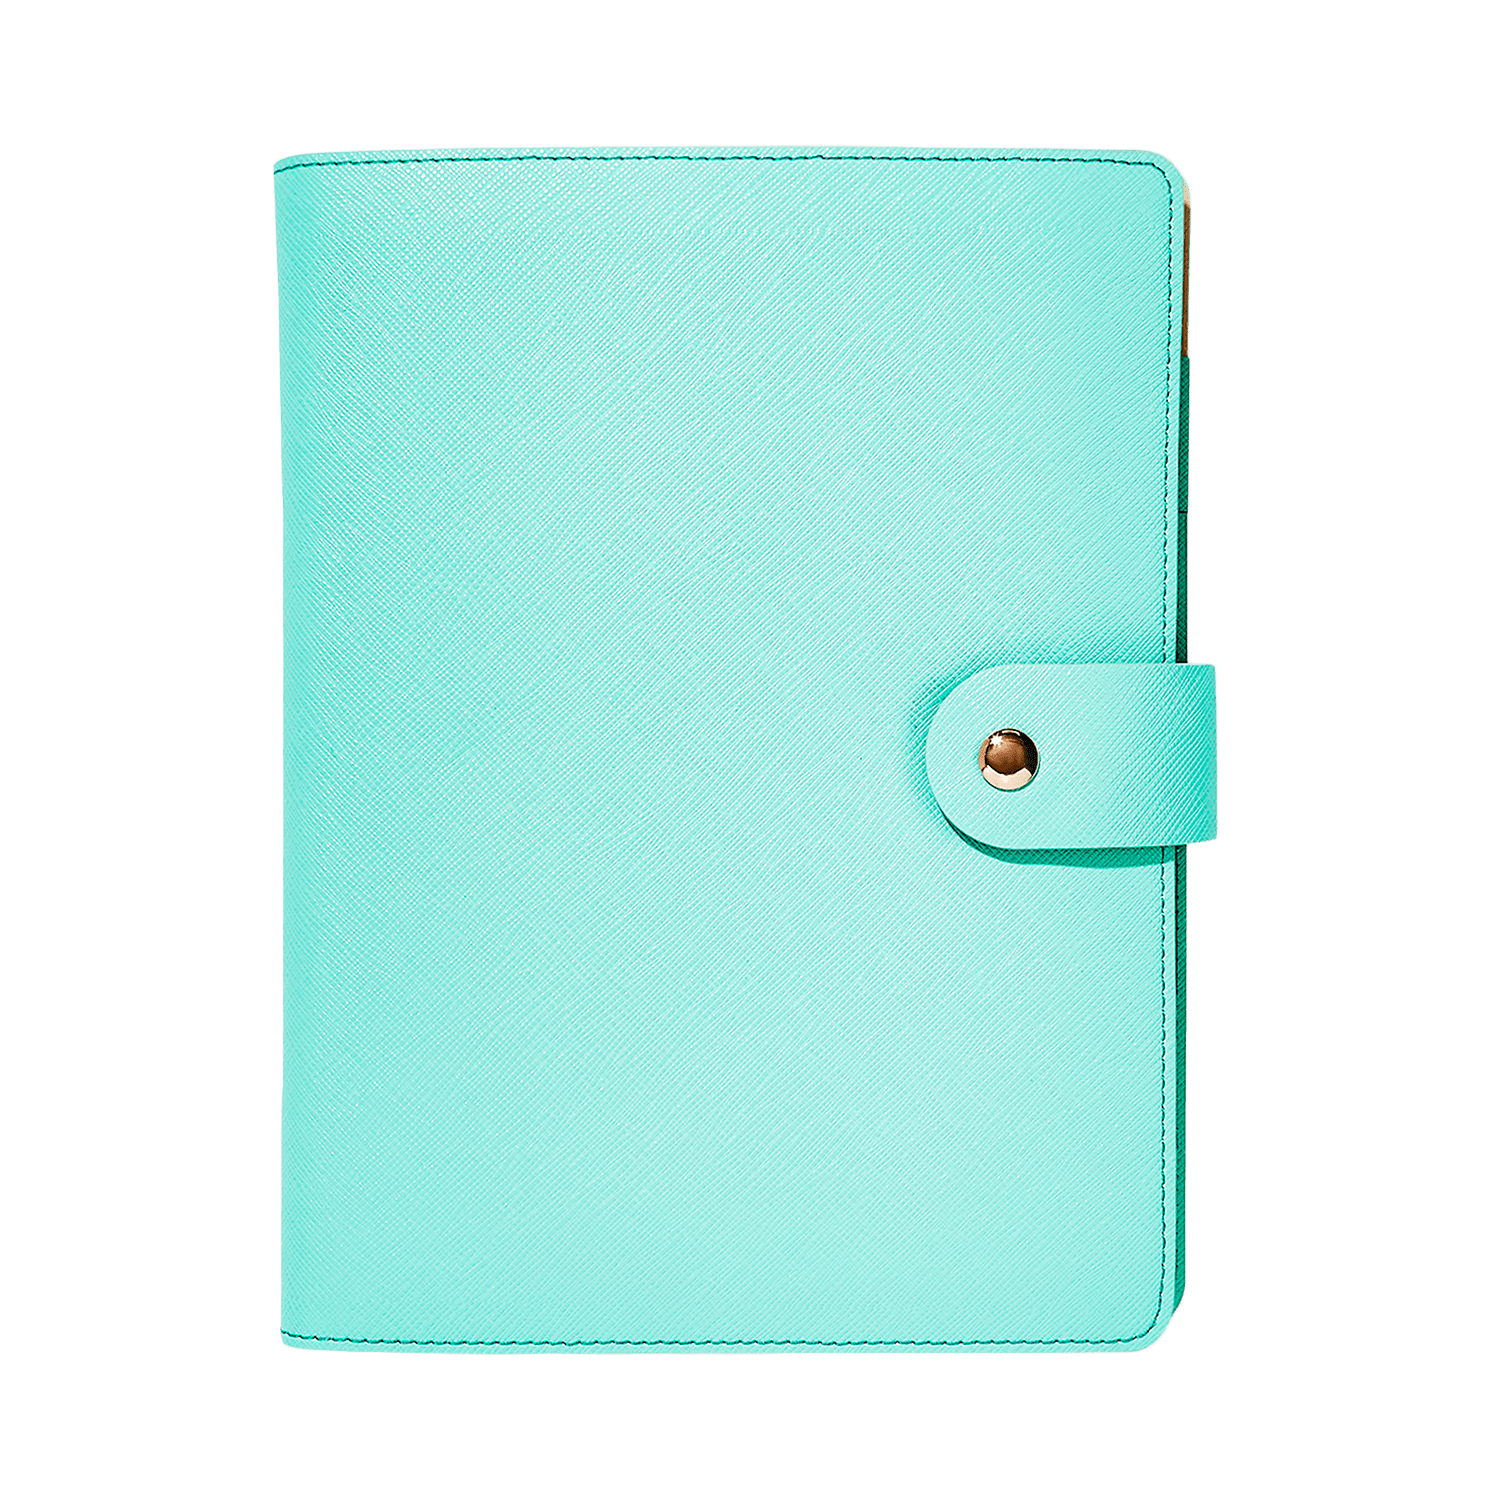 Textured Notebook | Personalized Notebook - Stoney Clover Lane